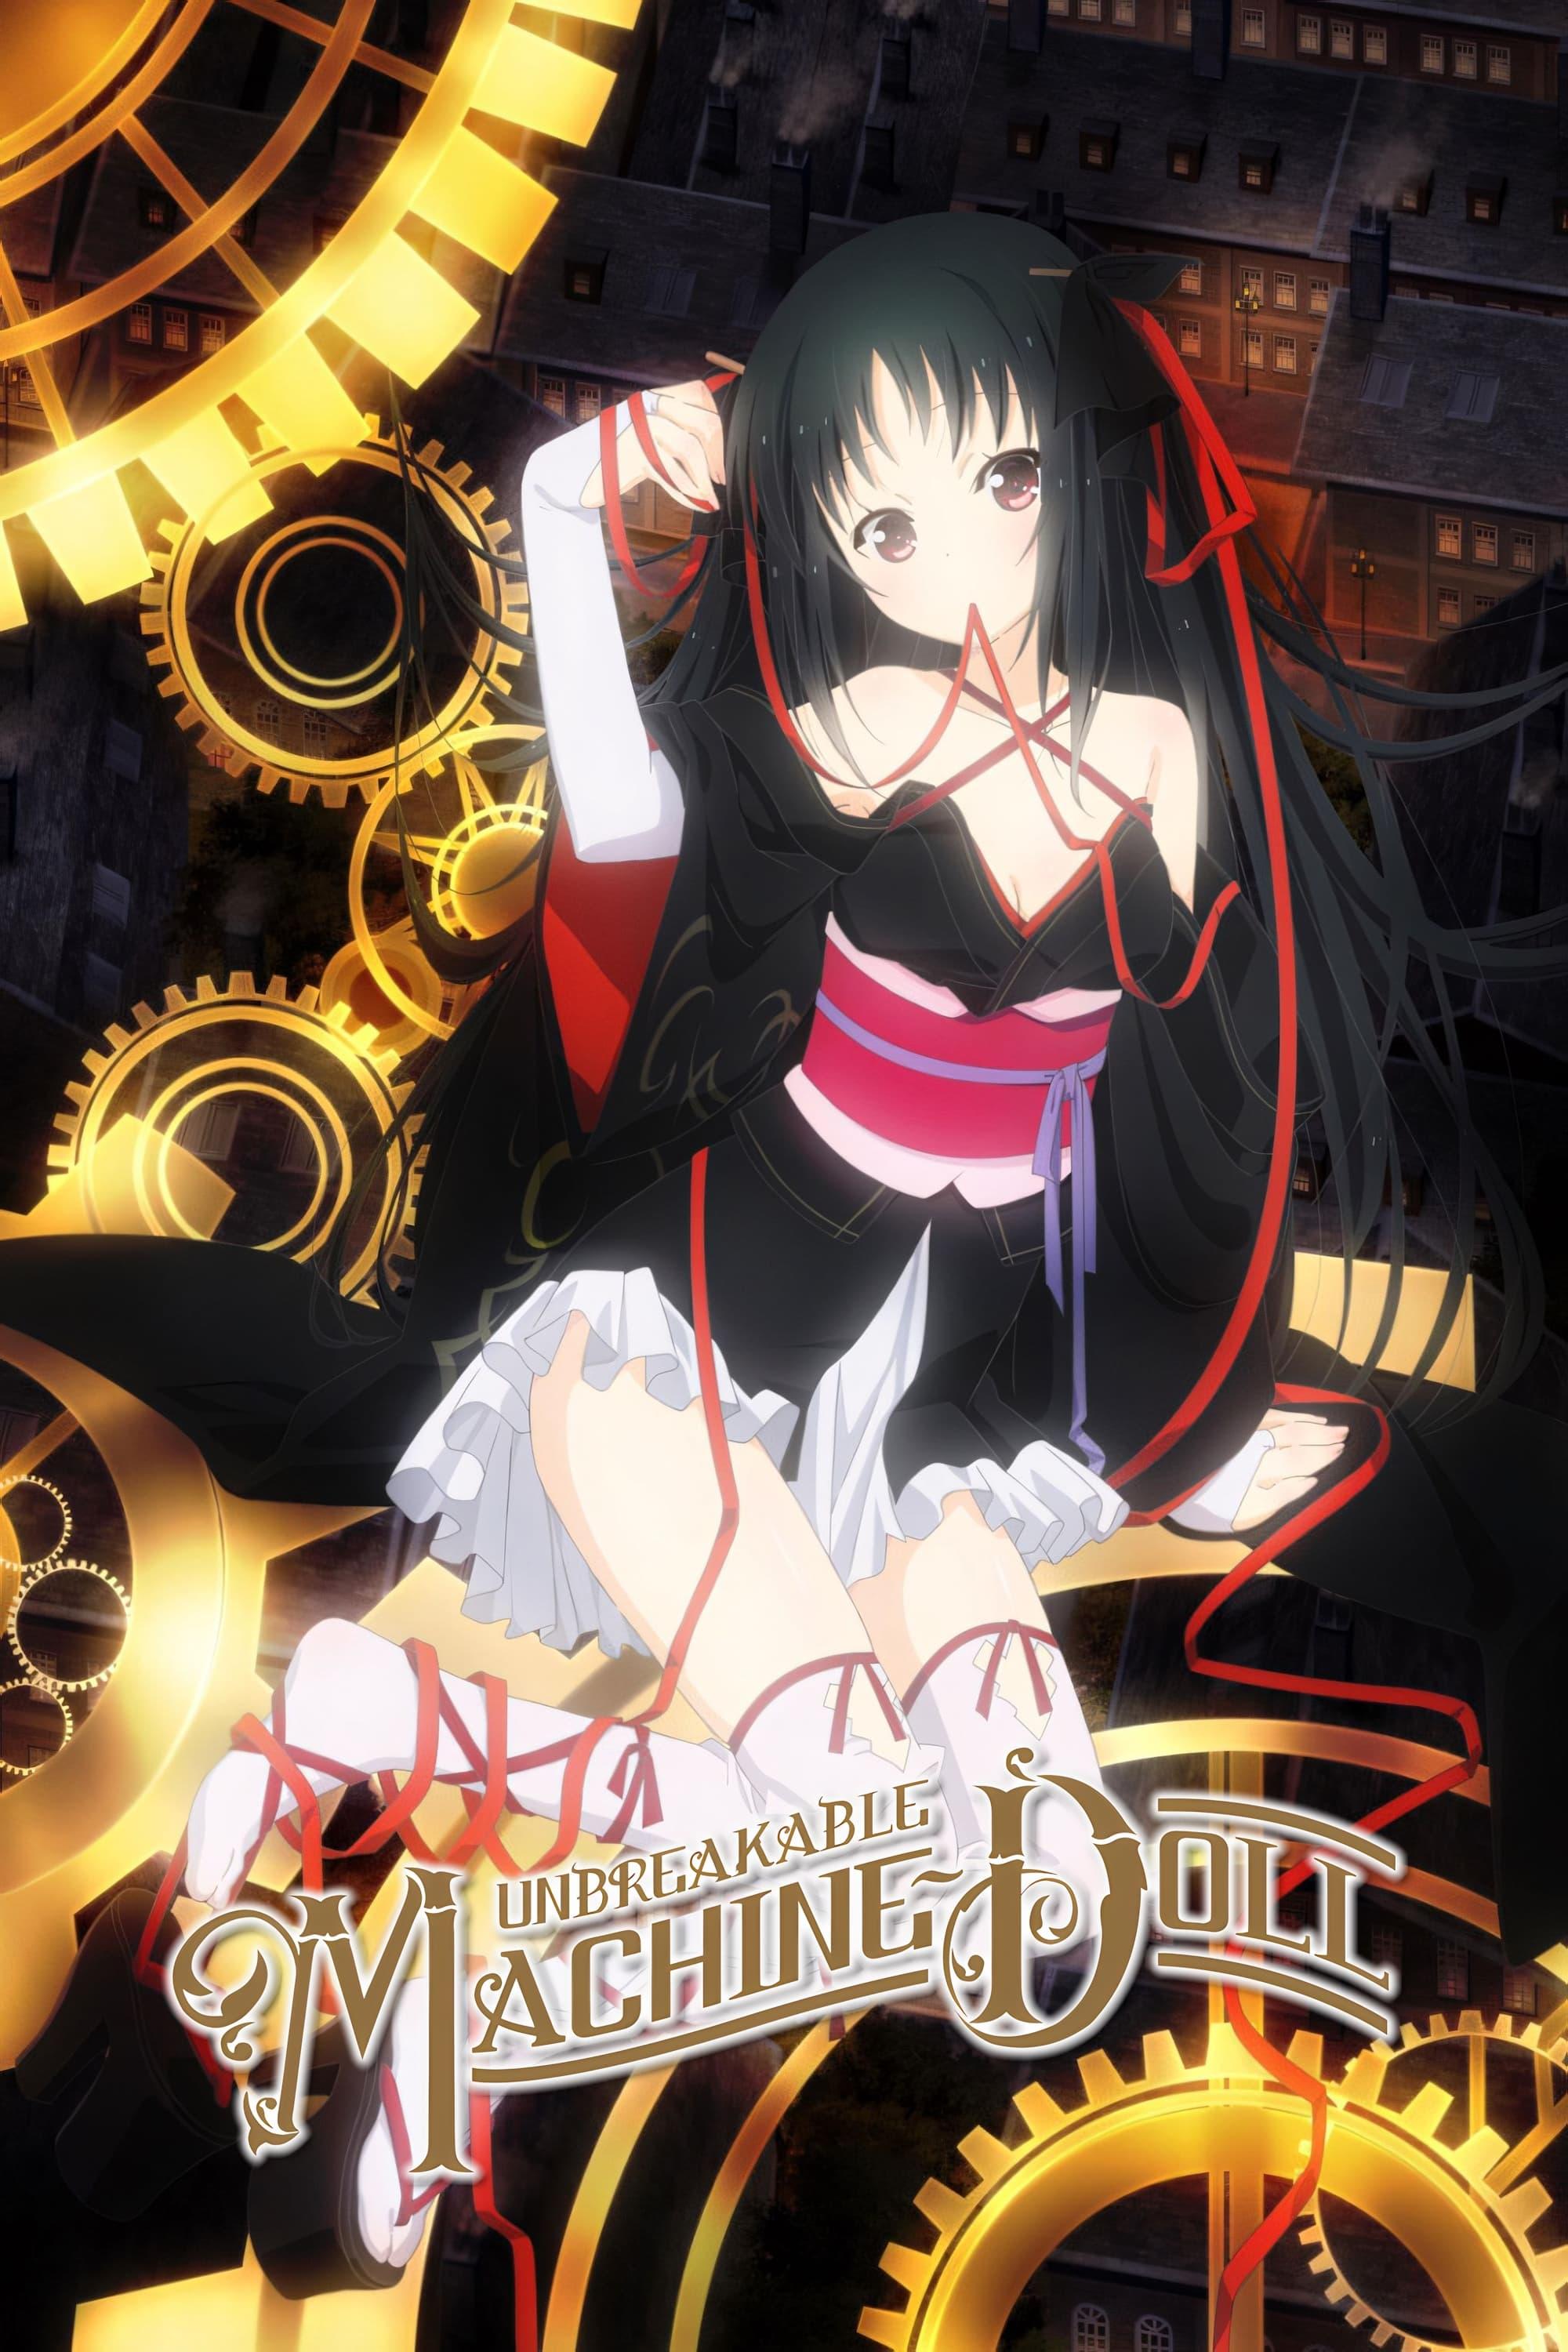 Unbreakable Machine-Doll poster